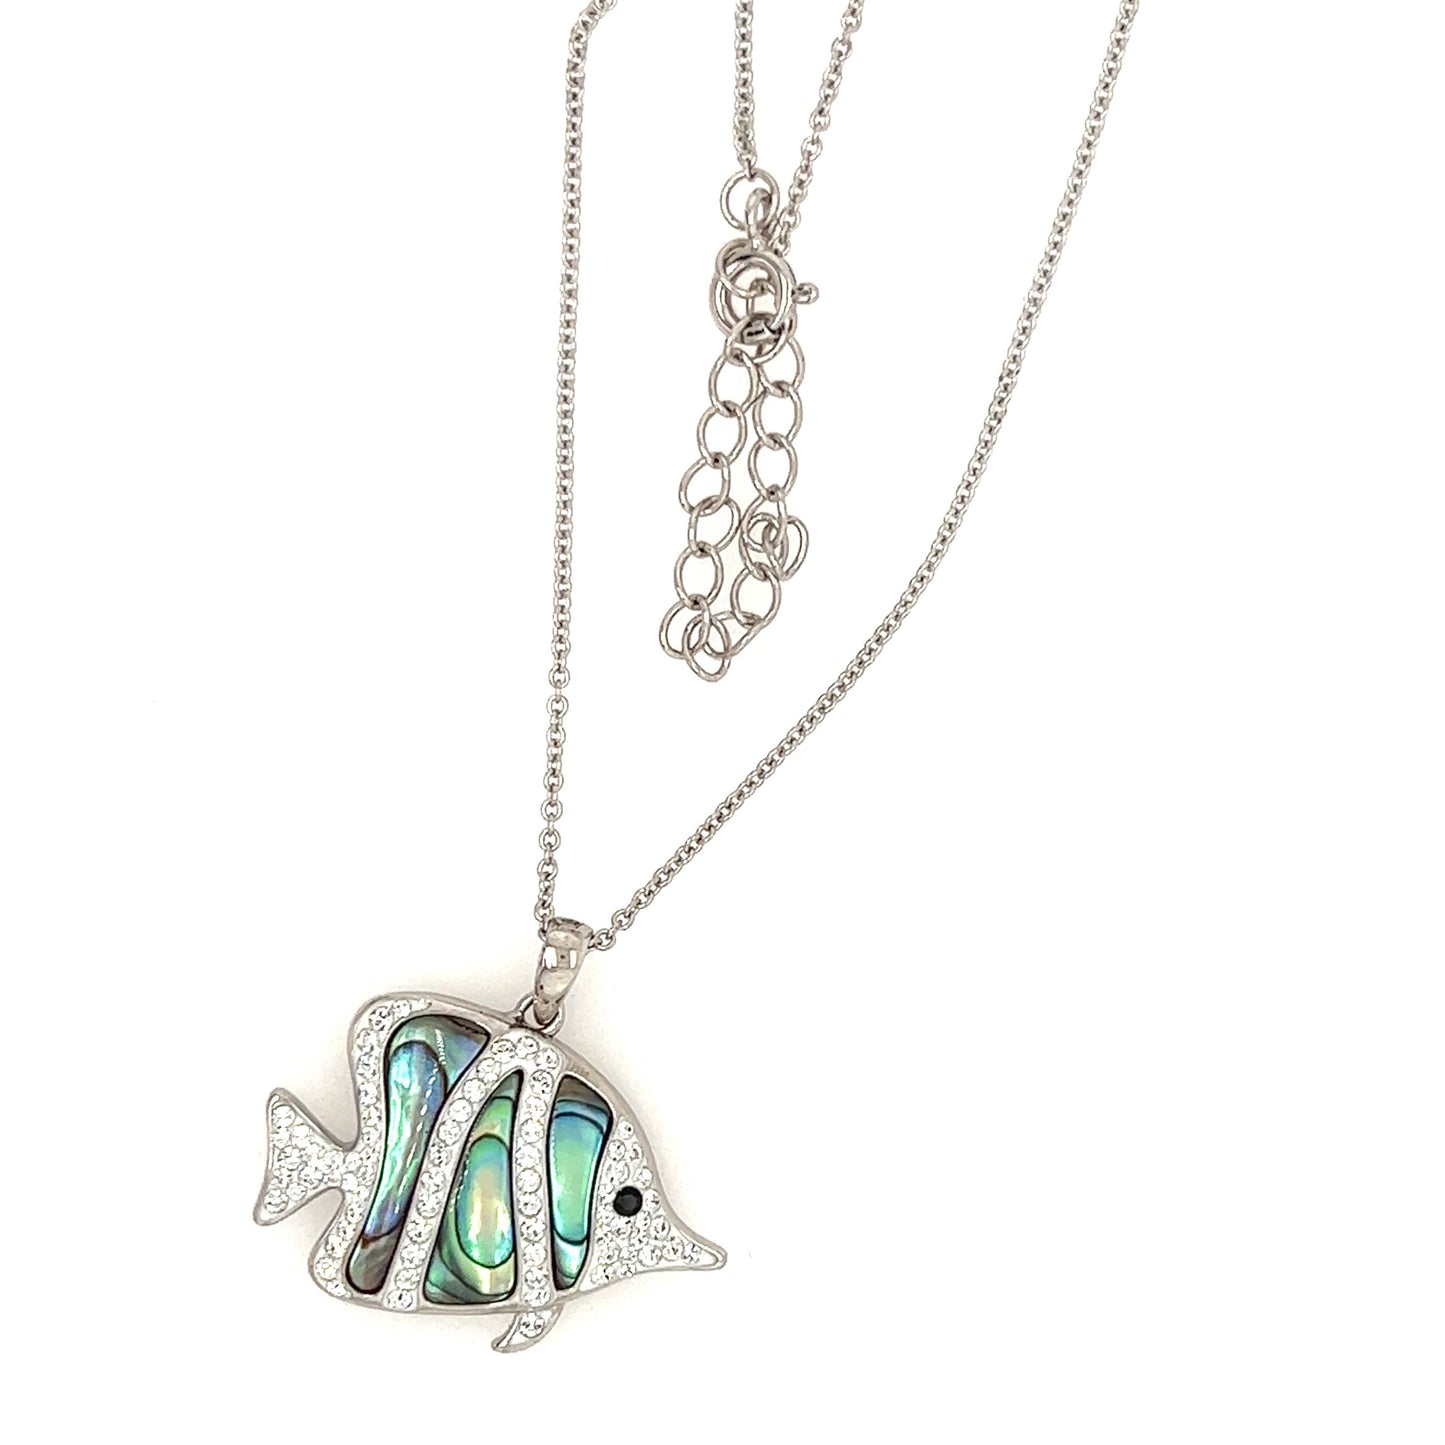 Hippo Tang Fish Necklace with Abalone Shell and White Crystals in Sterling Silver Top View